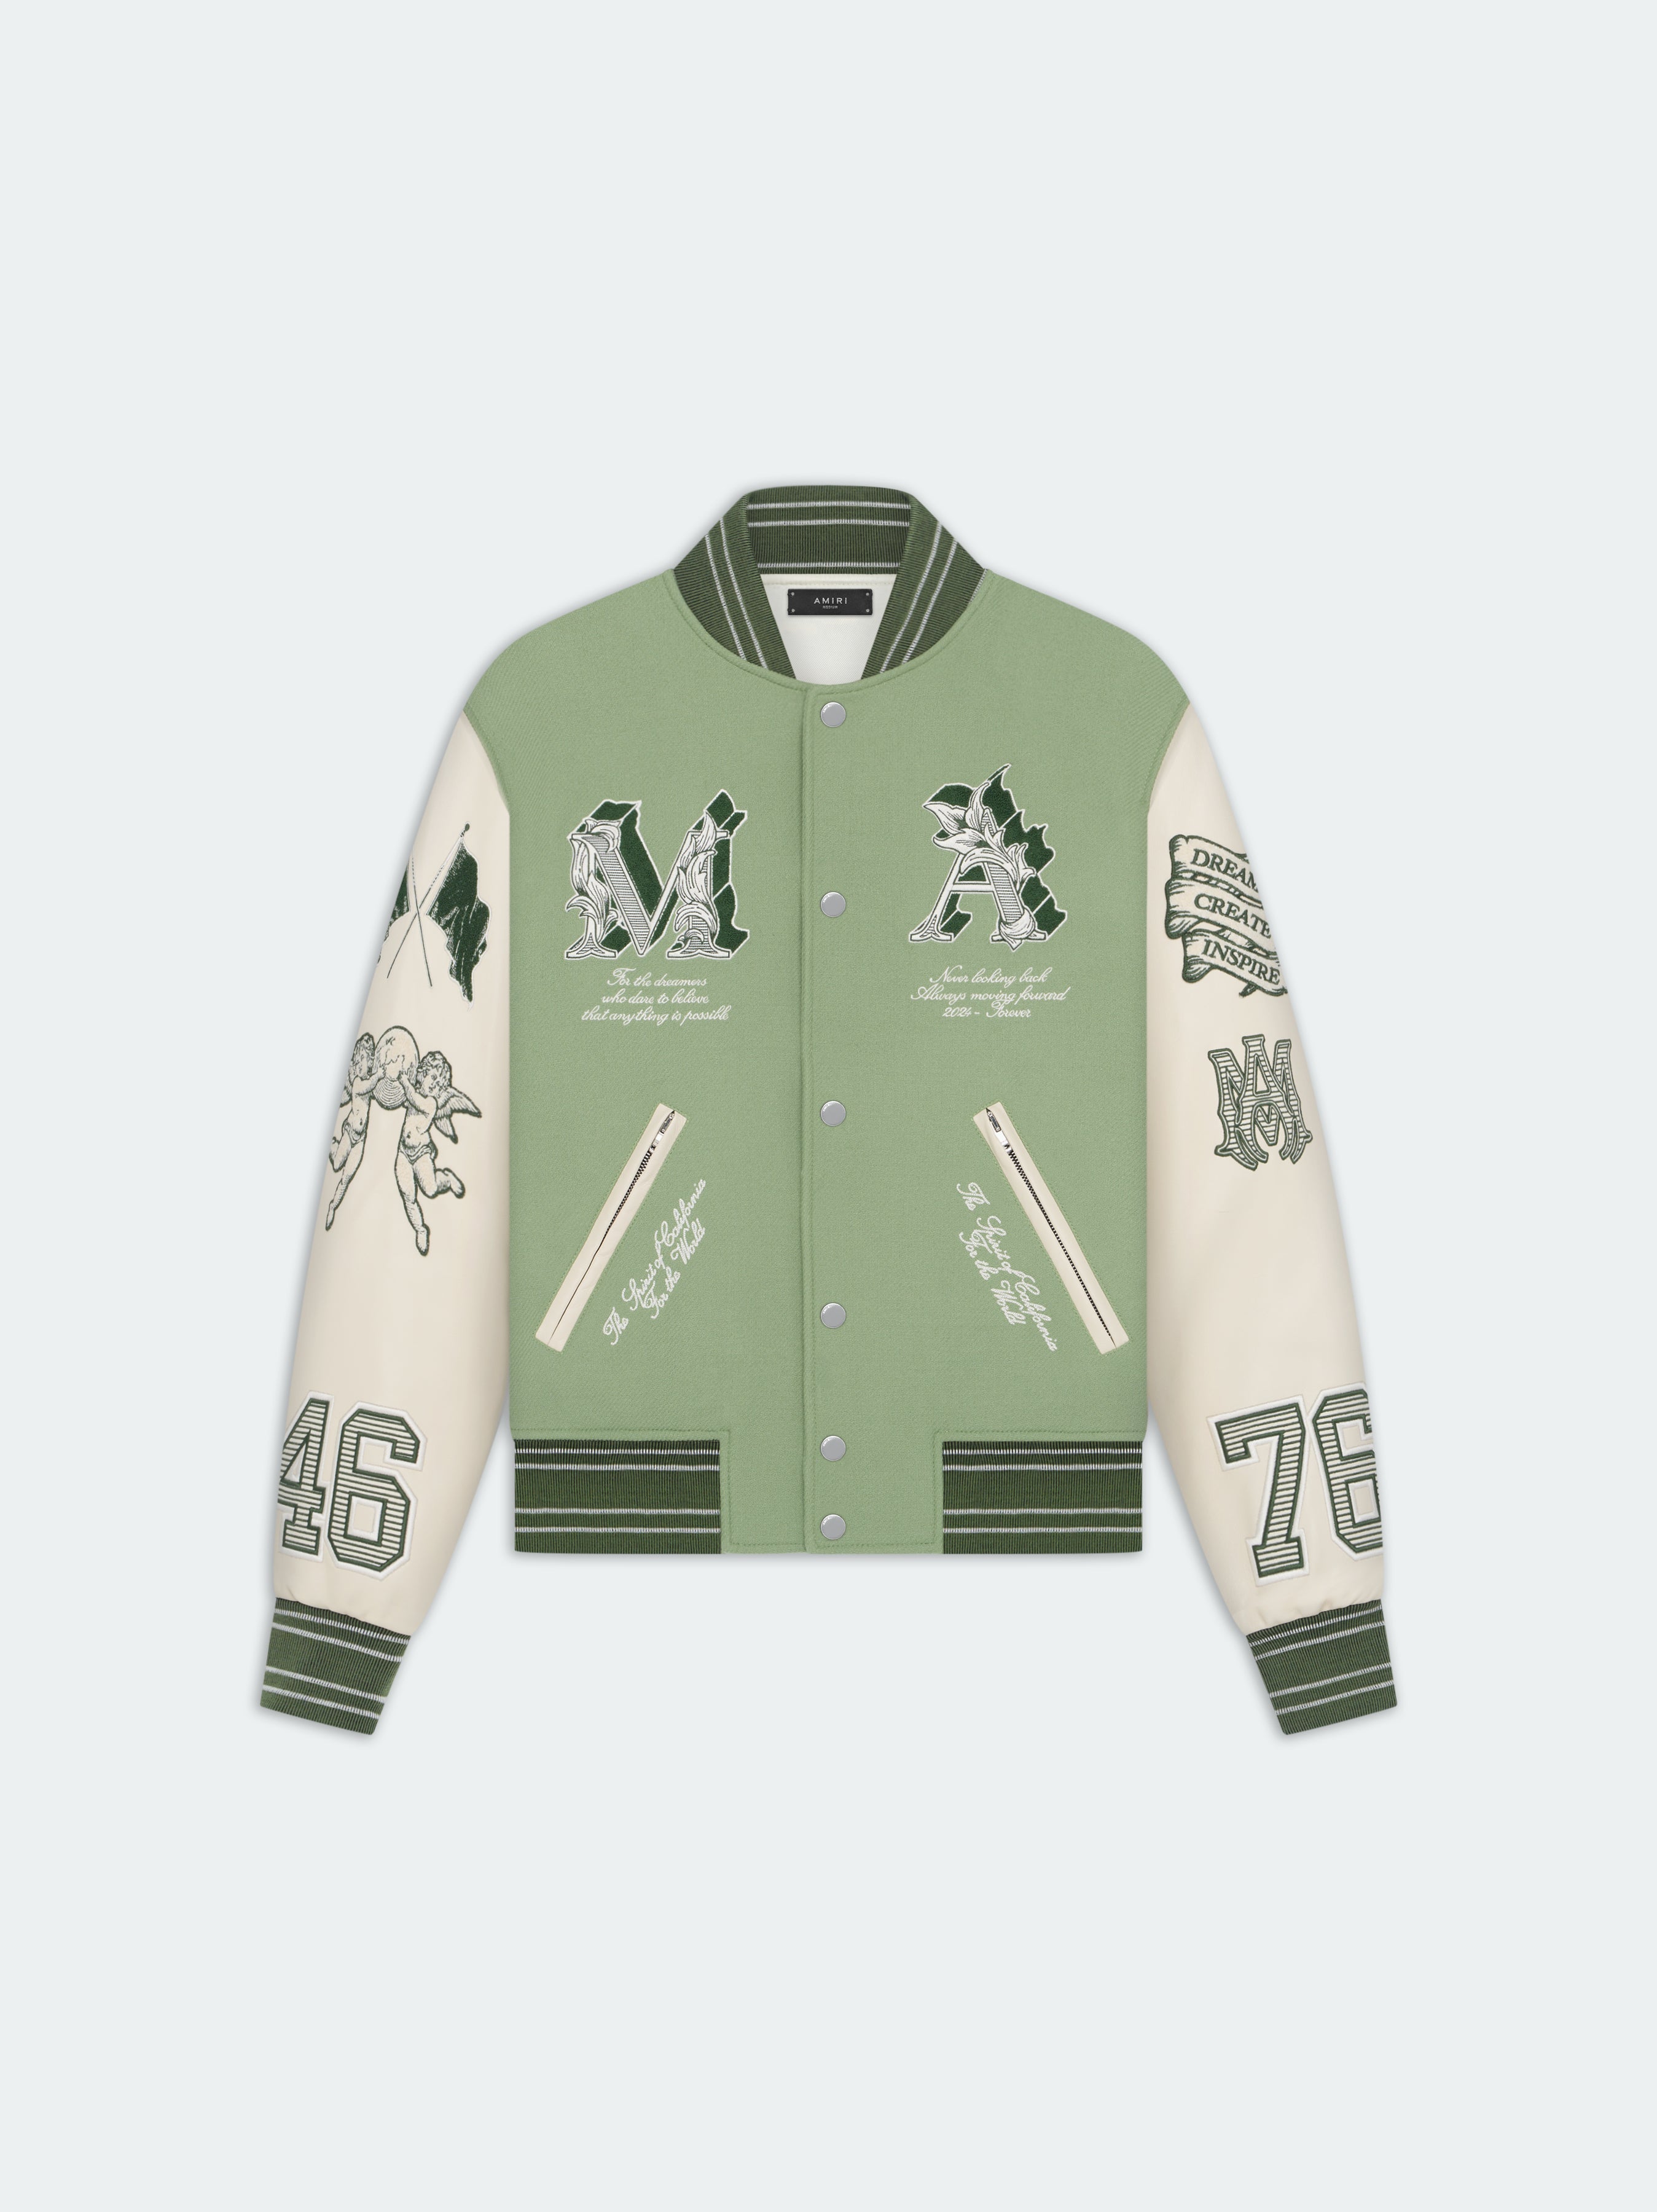 Product MA ANGEL VARSITY JACKET - Mineral Green featured image